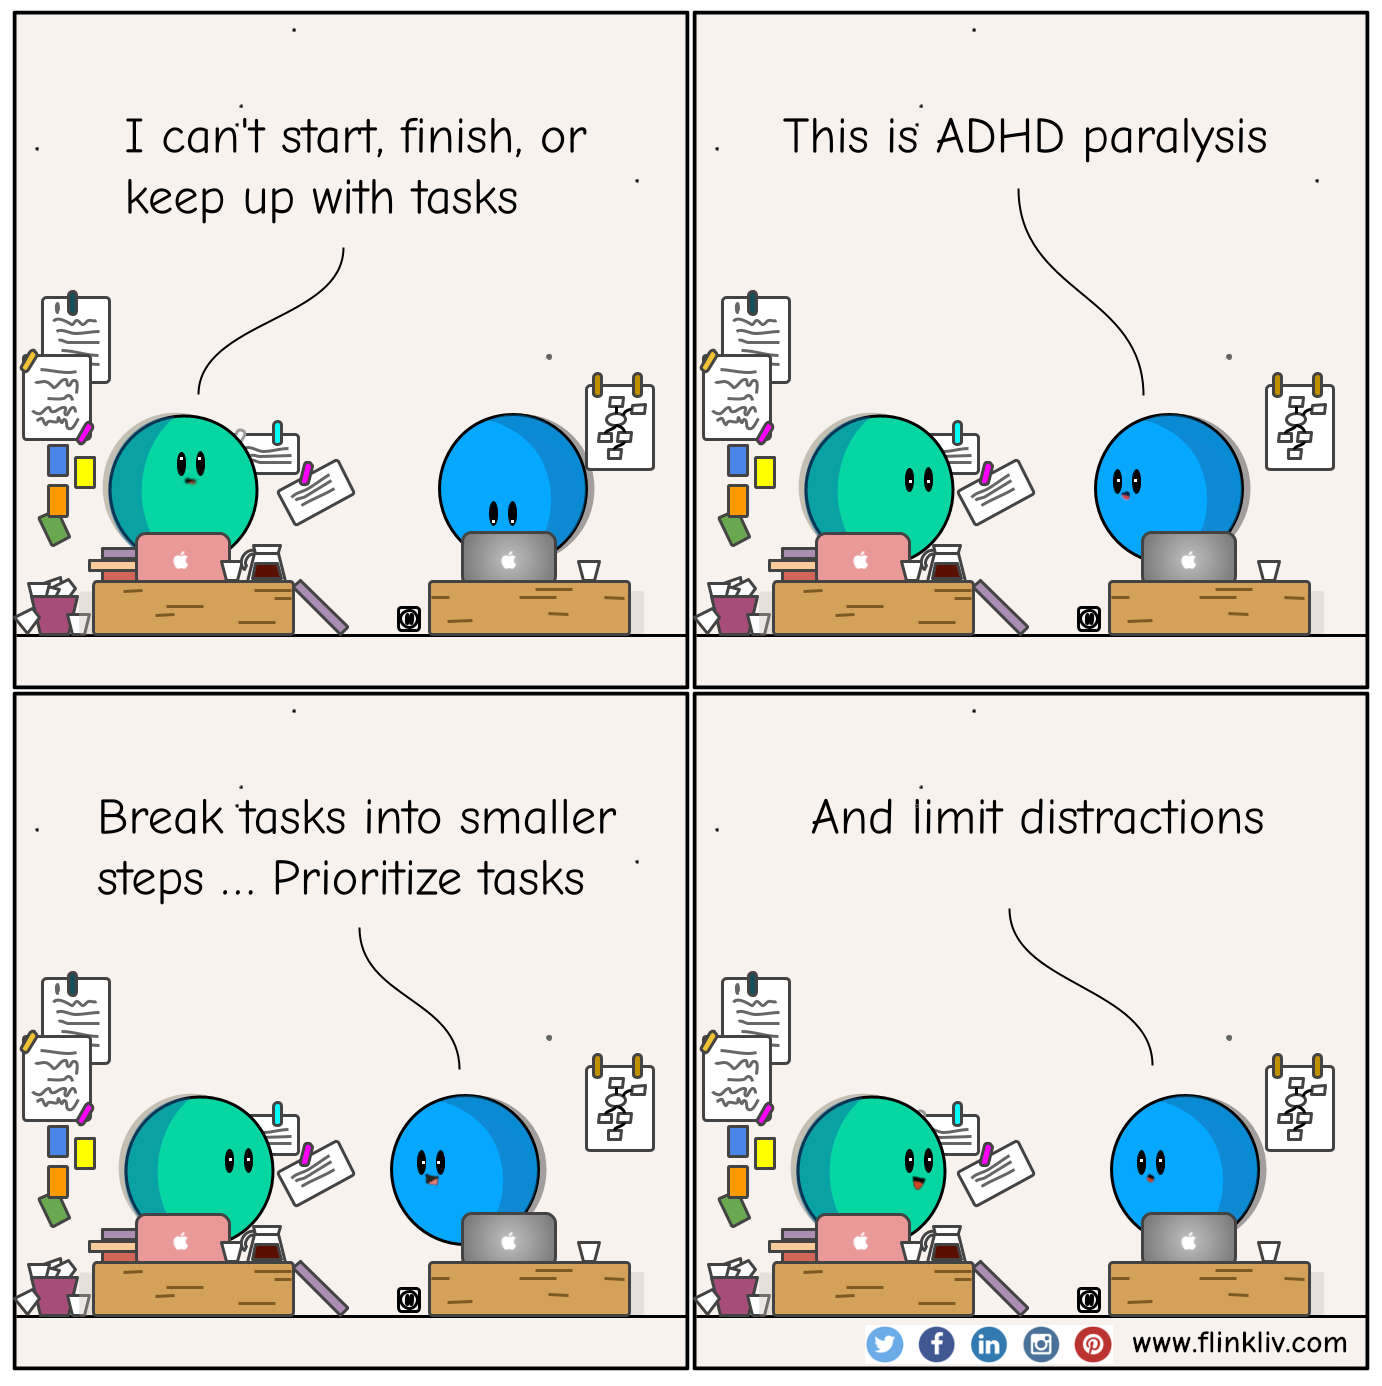 Conversation between A and B about how to fight ADHD paralysis
                            A: I can't start, finish, or keep up with tasks. 
                            B: This is ADHD paralysis.
                            B: Try breaking tasks into smaller steps.
                            B: Prioritize tasks and limit distractions.
								By flinkliv.com
                        